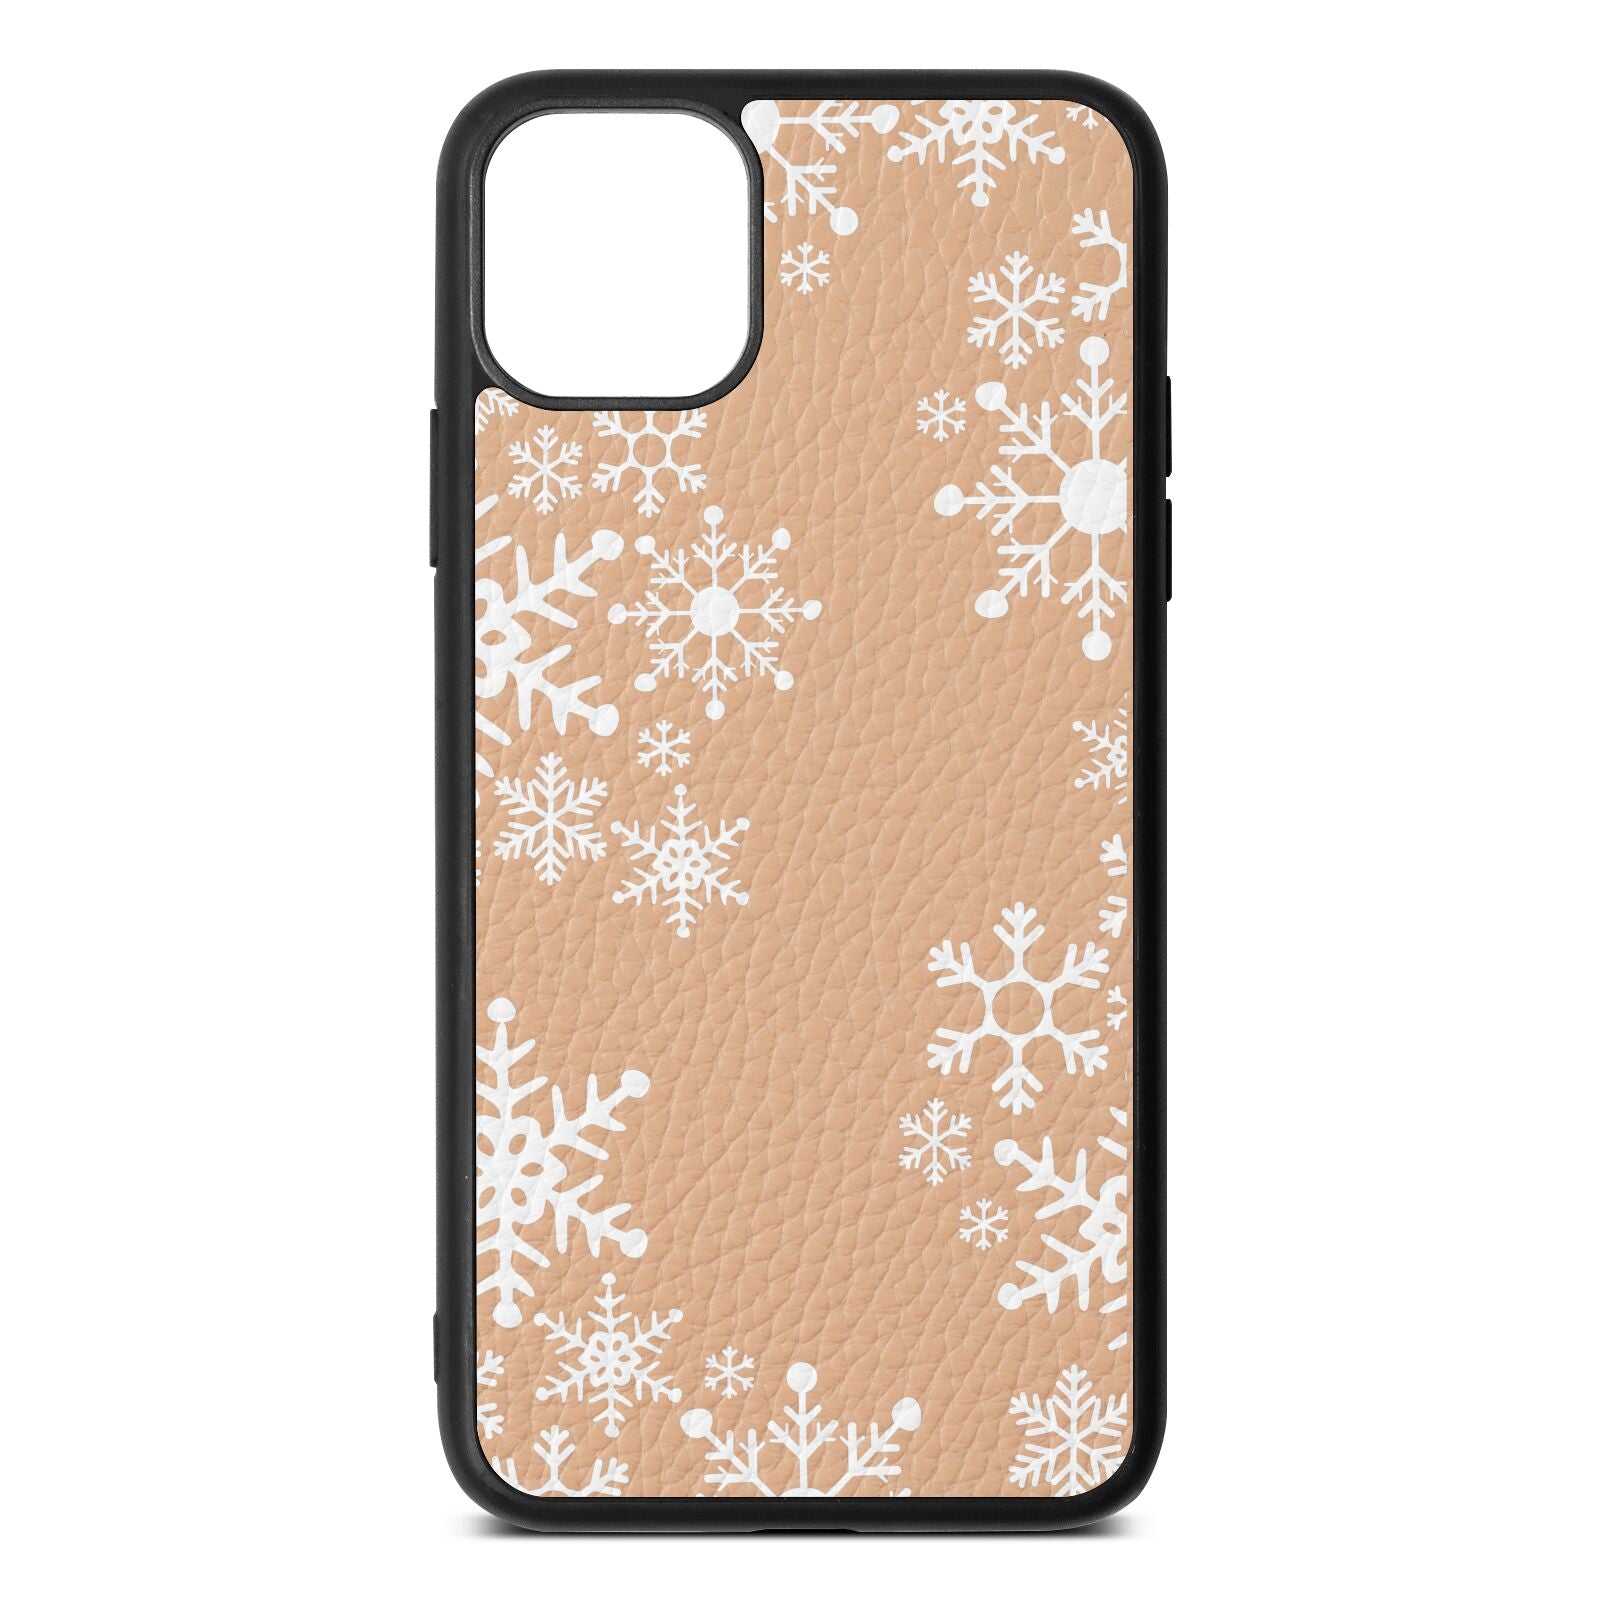 Snowflake Nude Pebble Leather iPhone 11 Pro Max Case